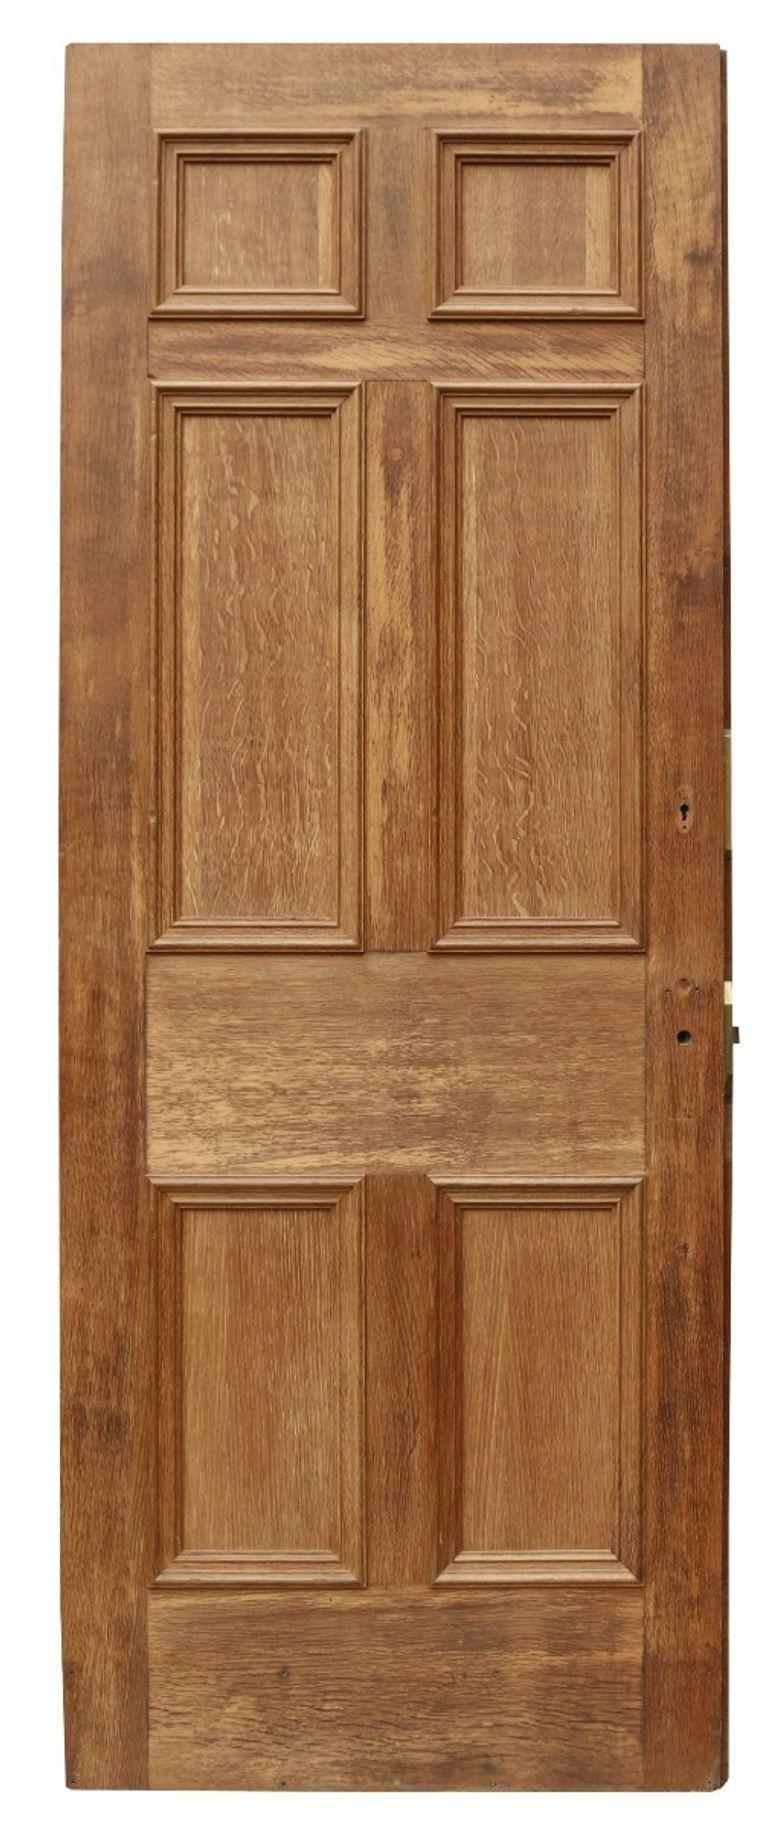 A reclaimed six panel front door constructed from oak.